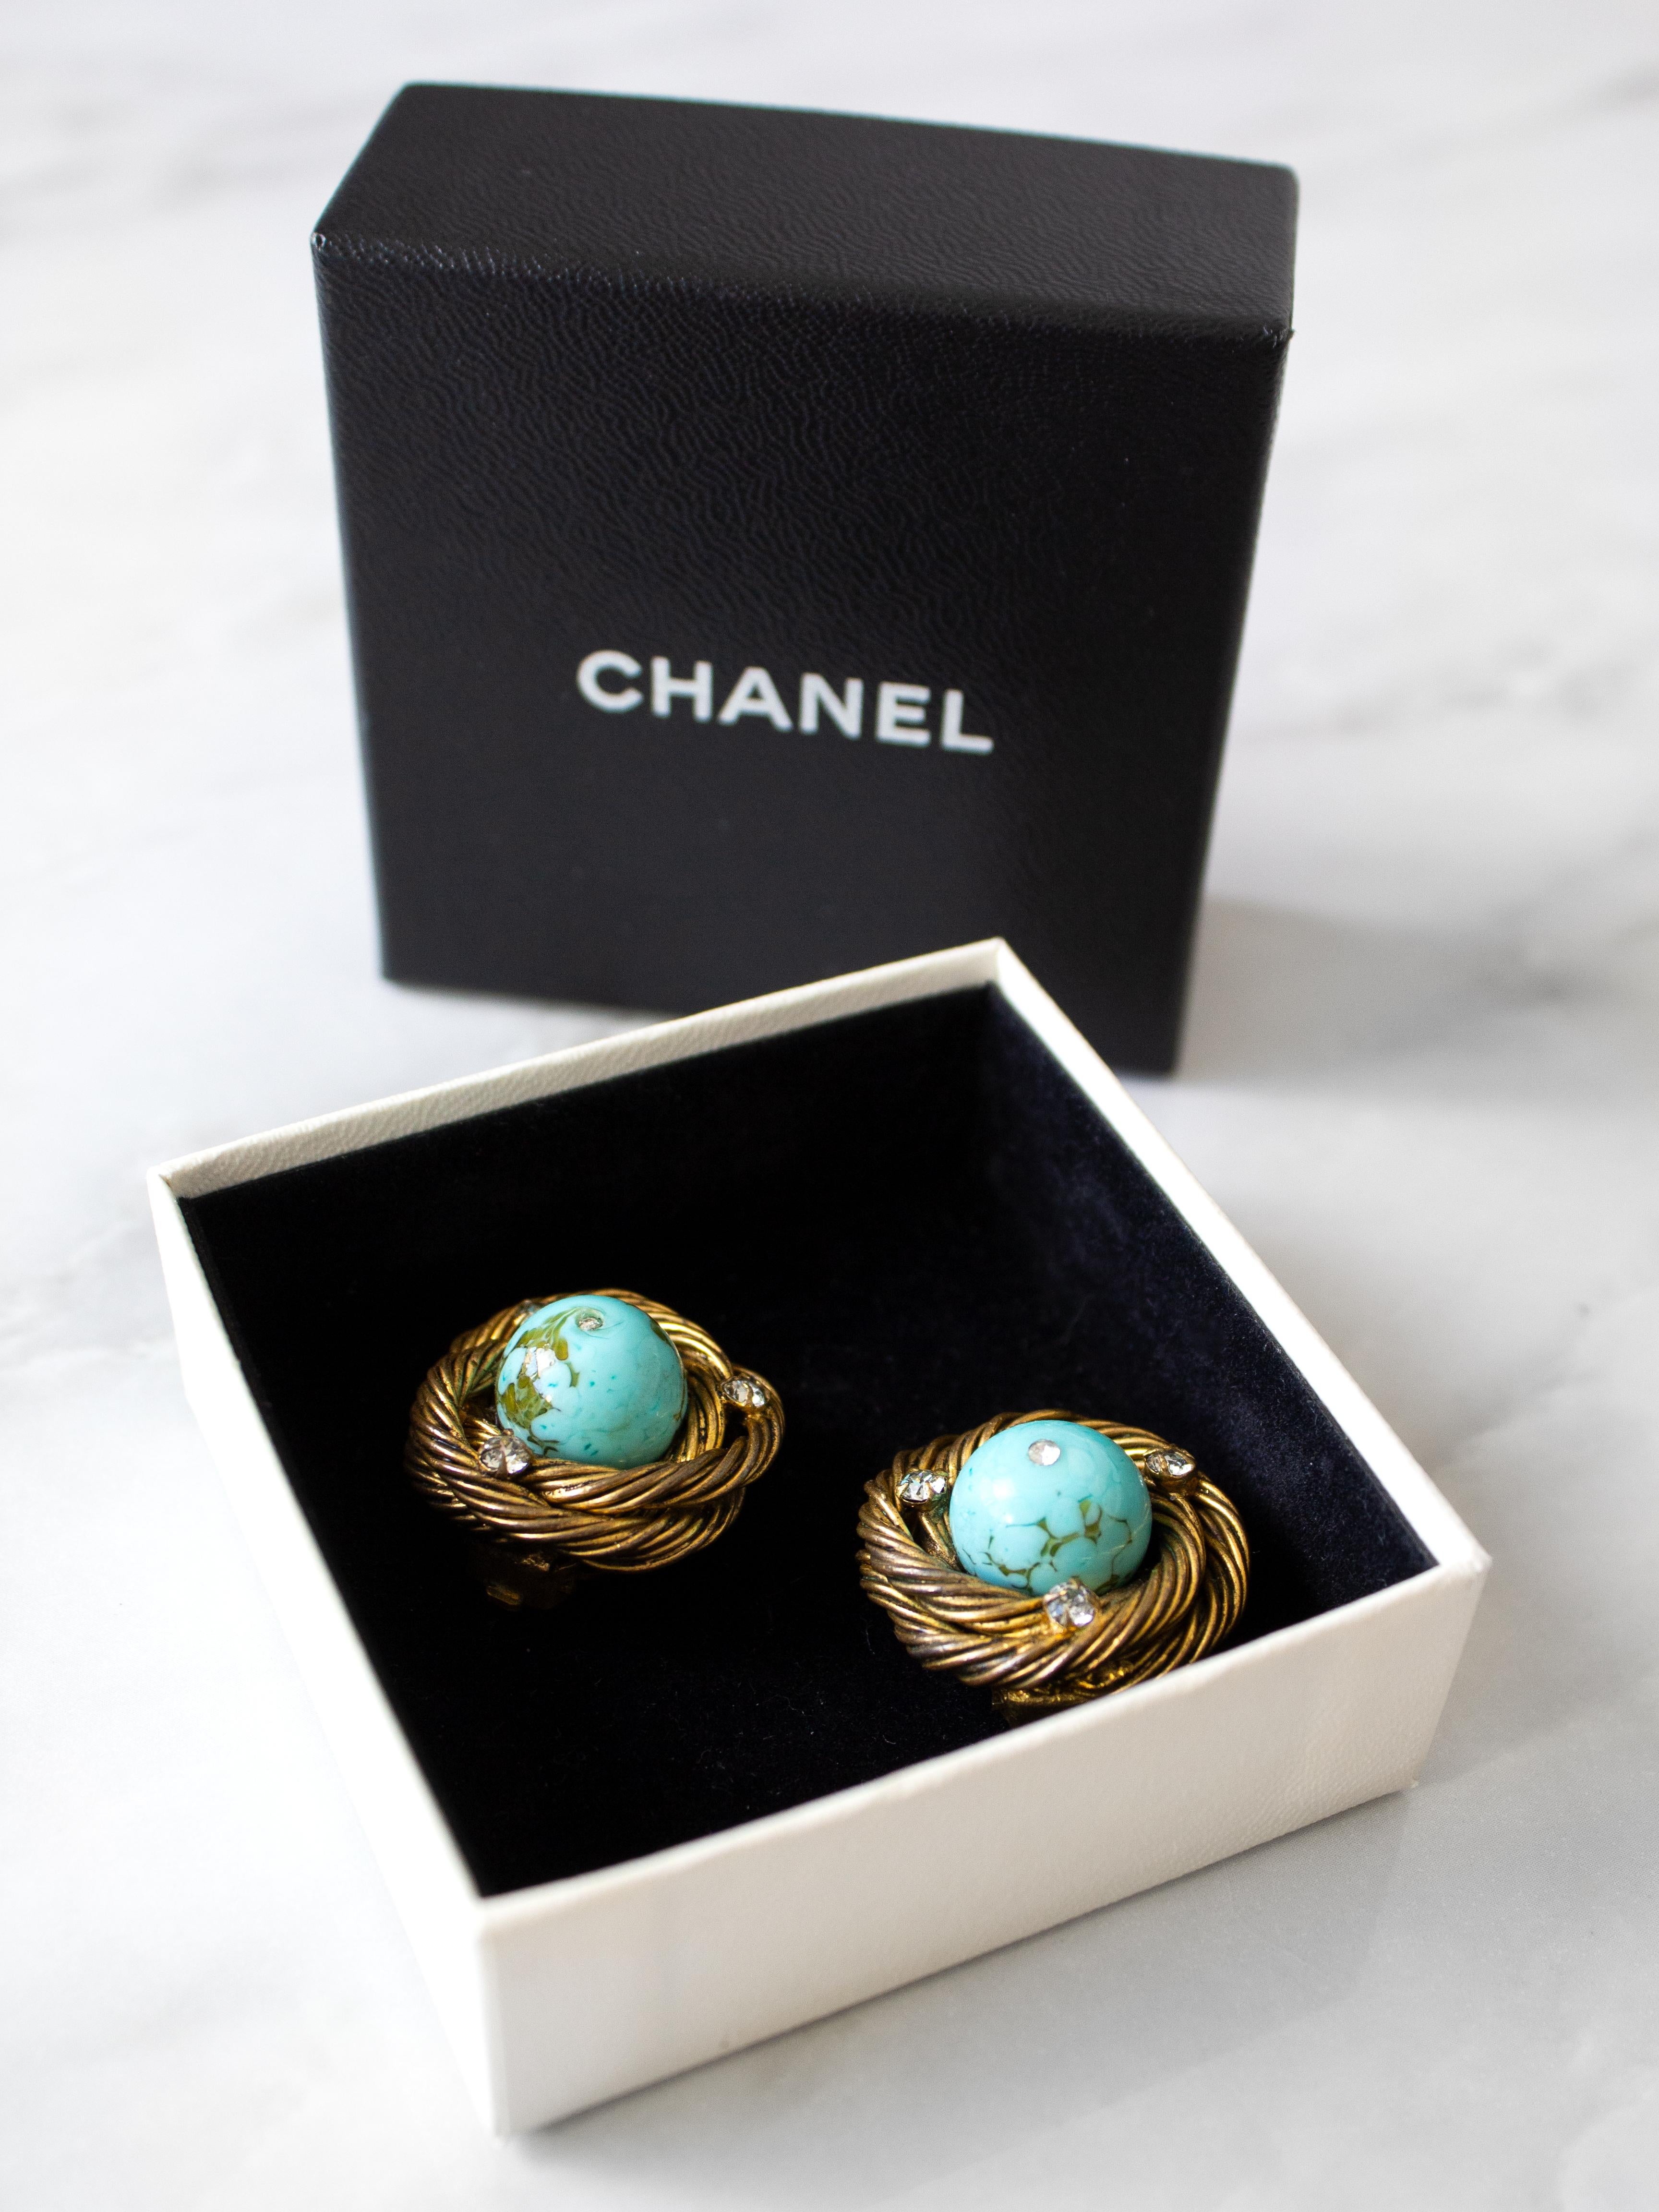 Presenting a rare and remarkable find - Coco Chanel lifetime earrings by Robert Goossens. Creations from this highly recognizable collection produced from the late 1950s till the early 1960s have graced the Metropolitan Museum displays and featured